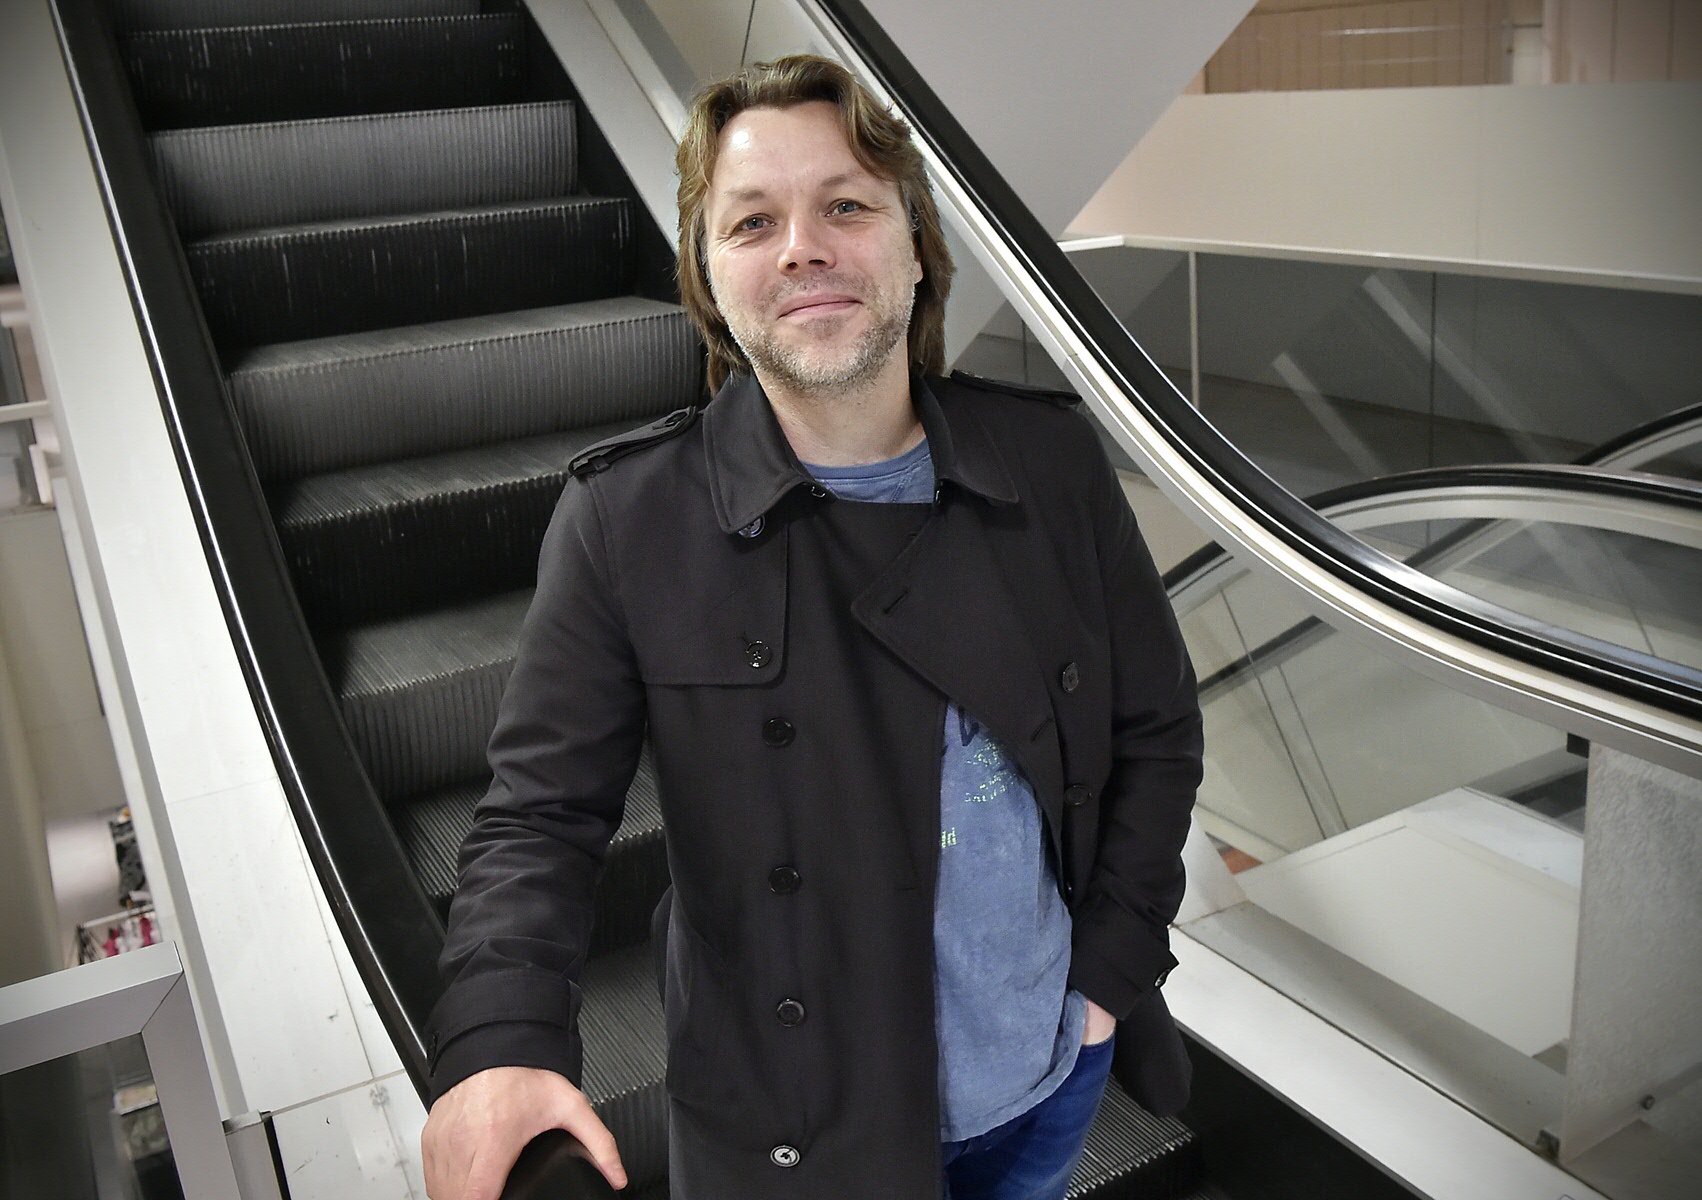 'Groningen’s 'escalator', like the one in many other Dutch cities, may be on the blink.'